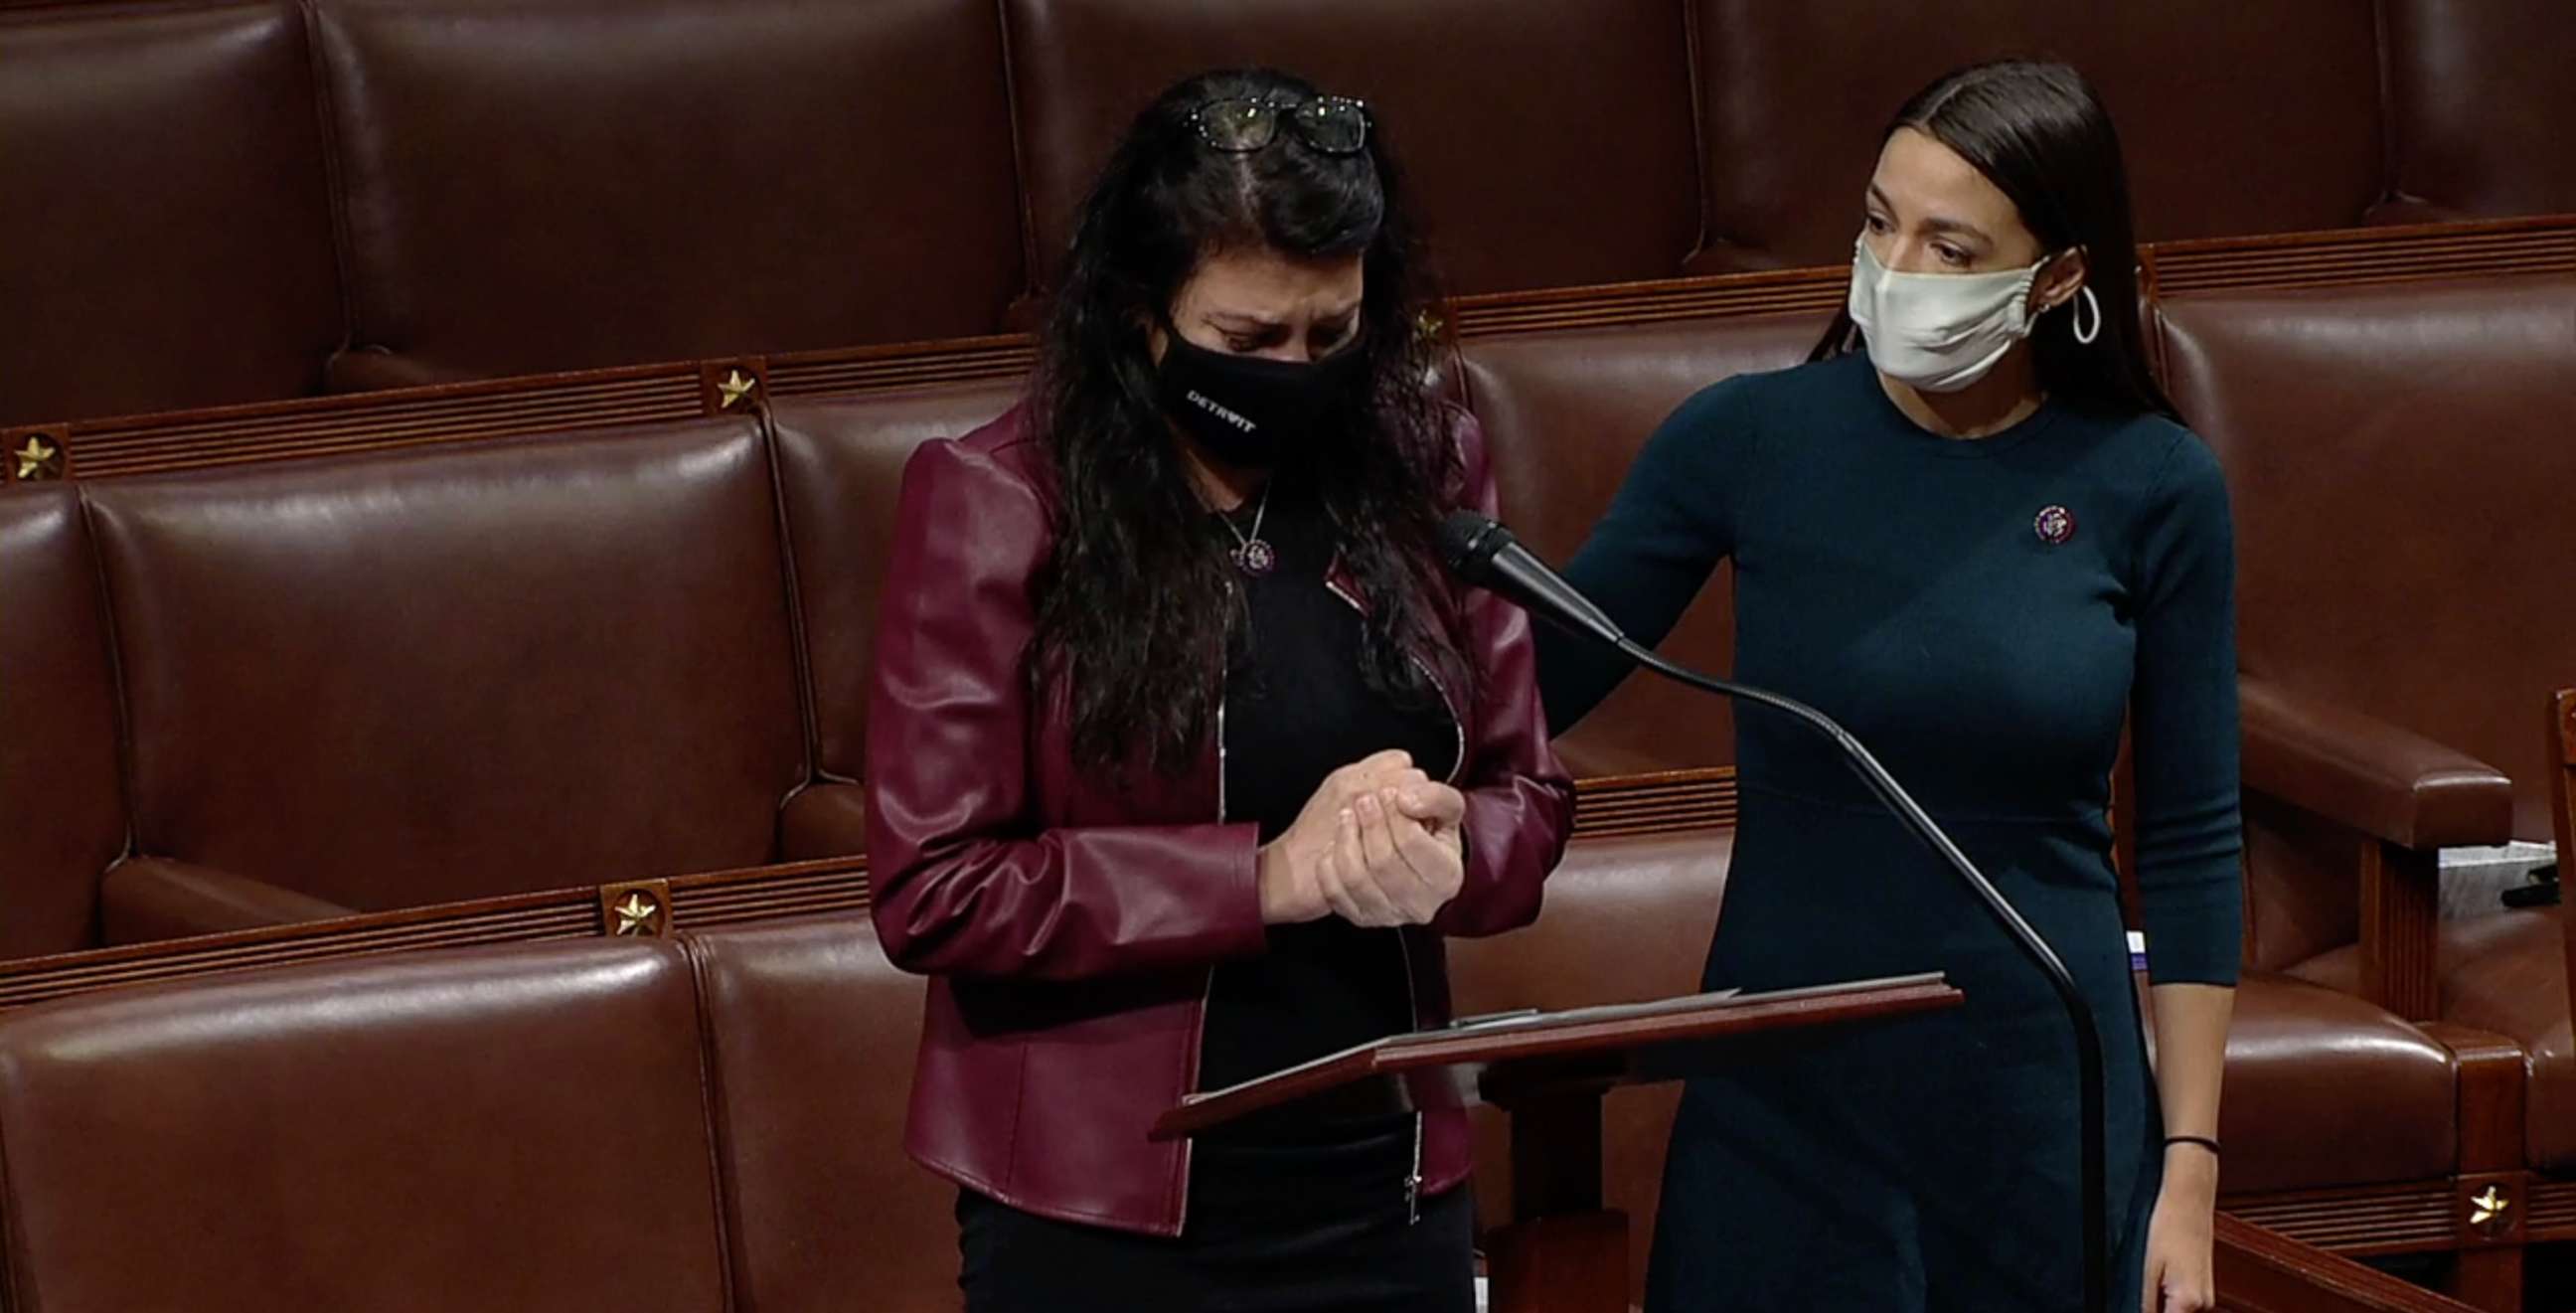 PHOTO: Rep. Rashida Tlaib is comforted by Rep. Alexandria Ocasio-Cortez while speaking on the house floor at the Capitol, Feb. 4, 2021.